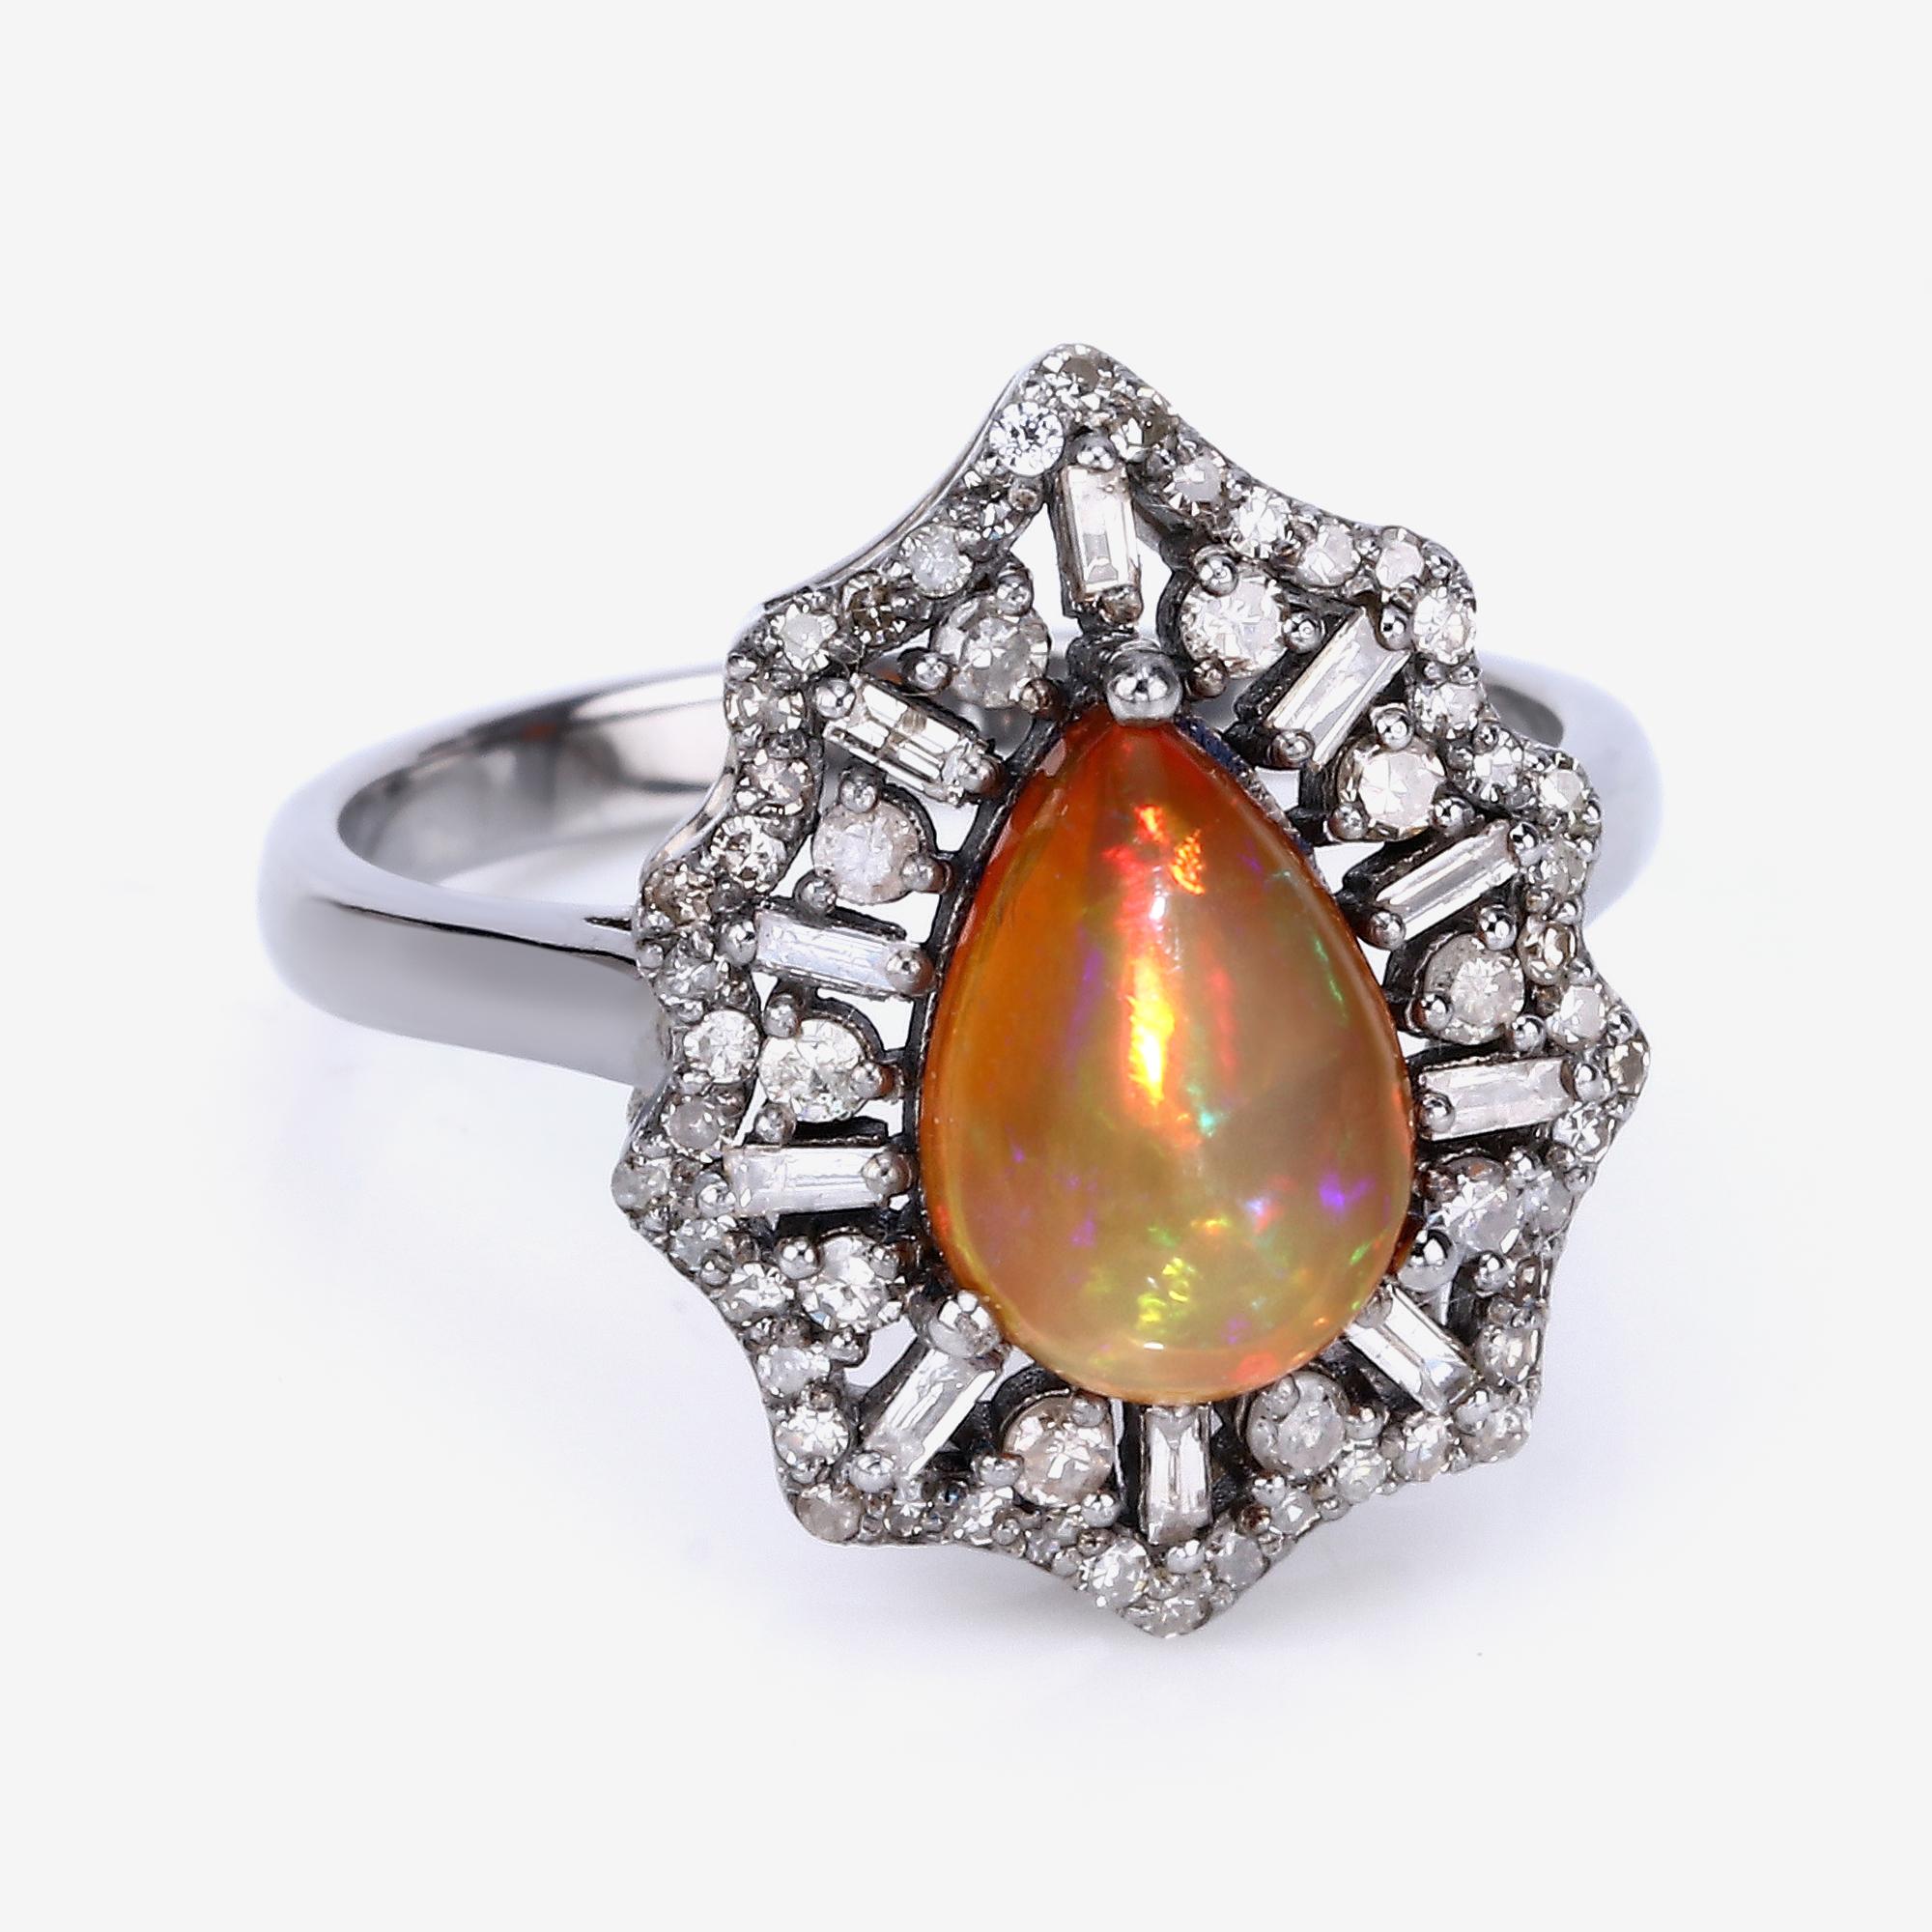 1.30cttw Ethiopian Opal with Diamonds 0.66cttw Sterling Silver Ring 1